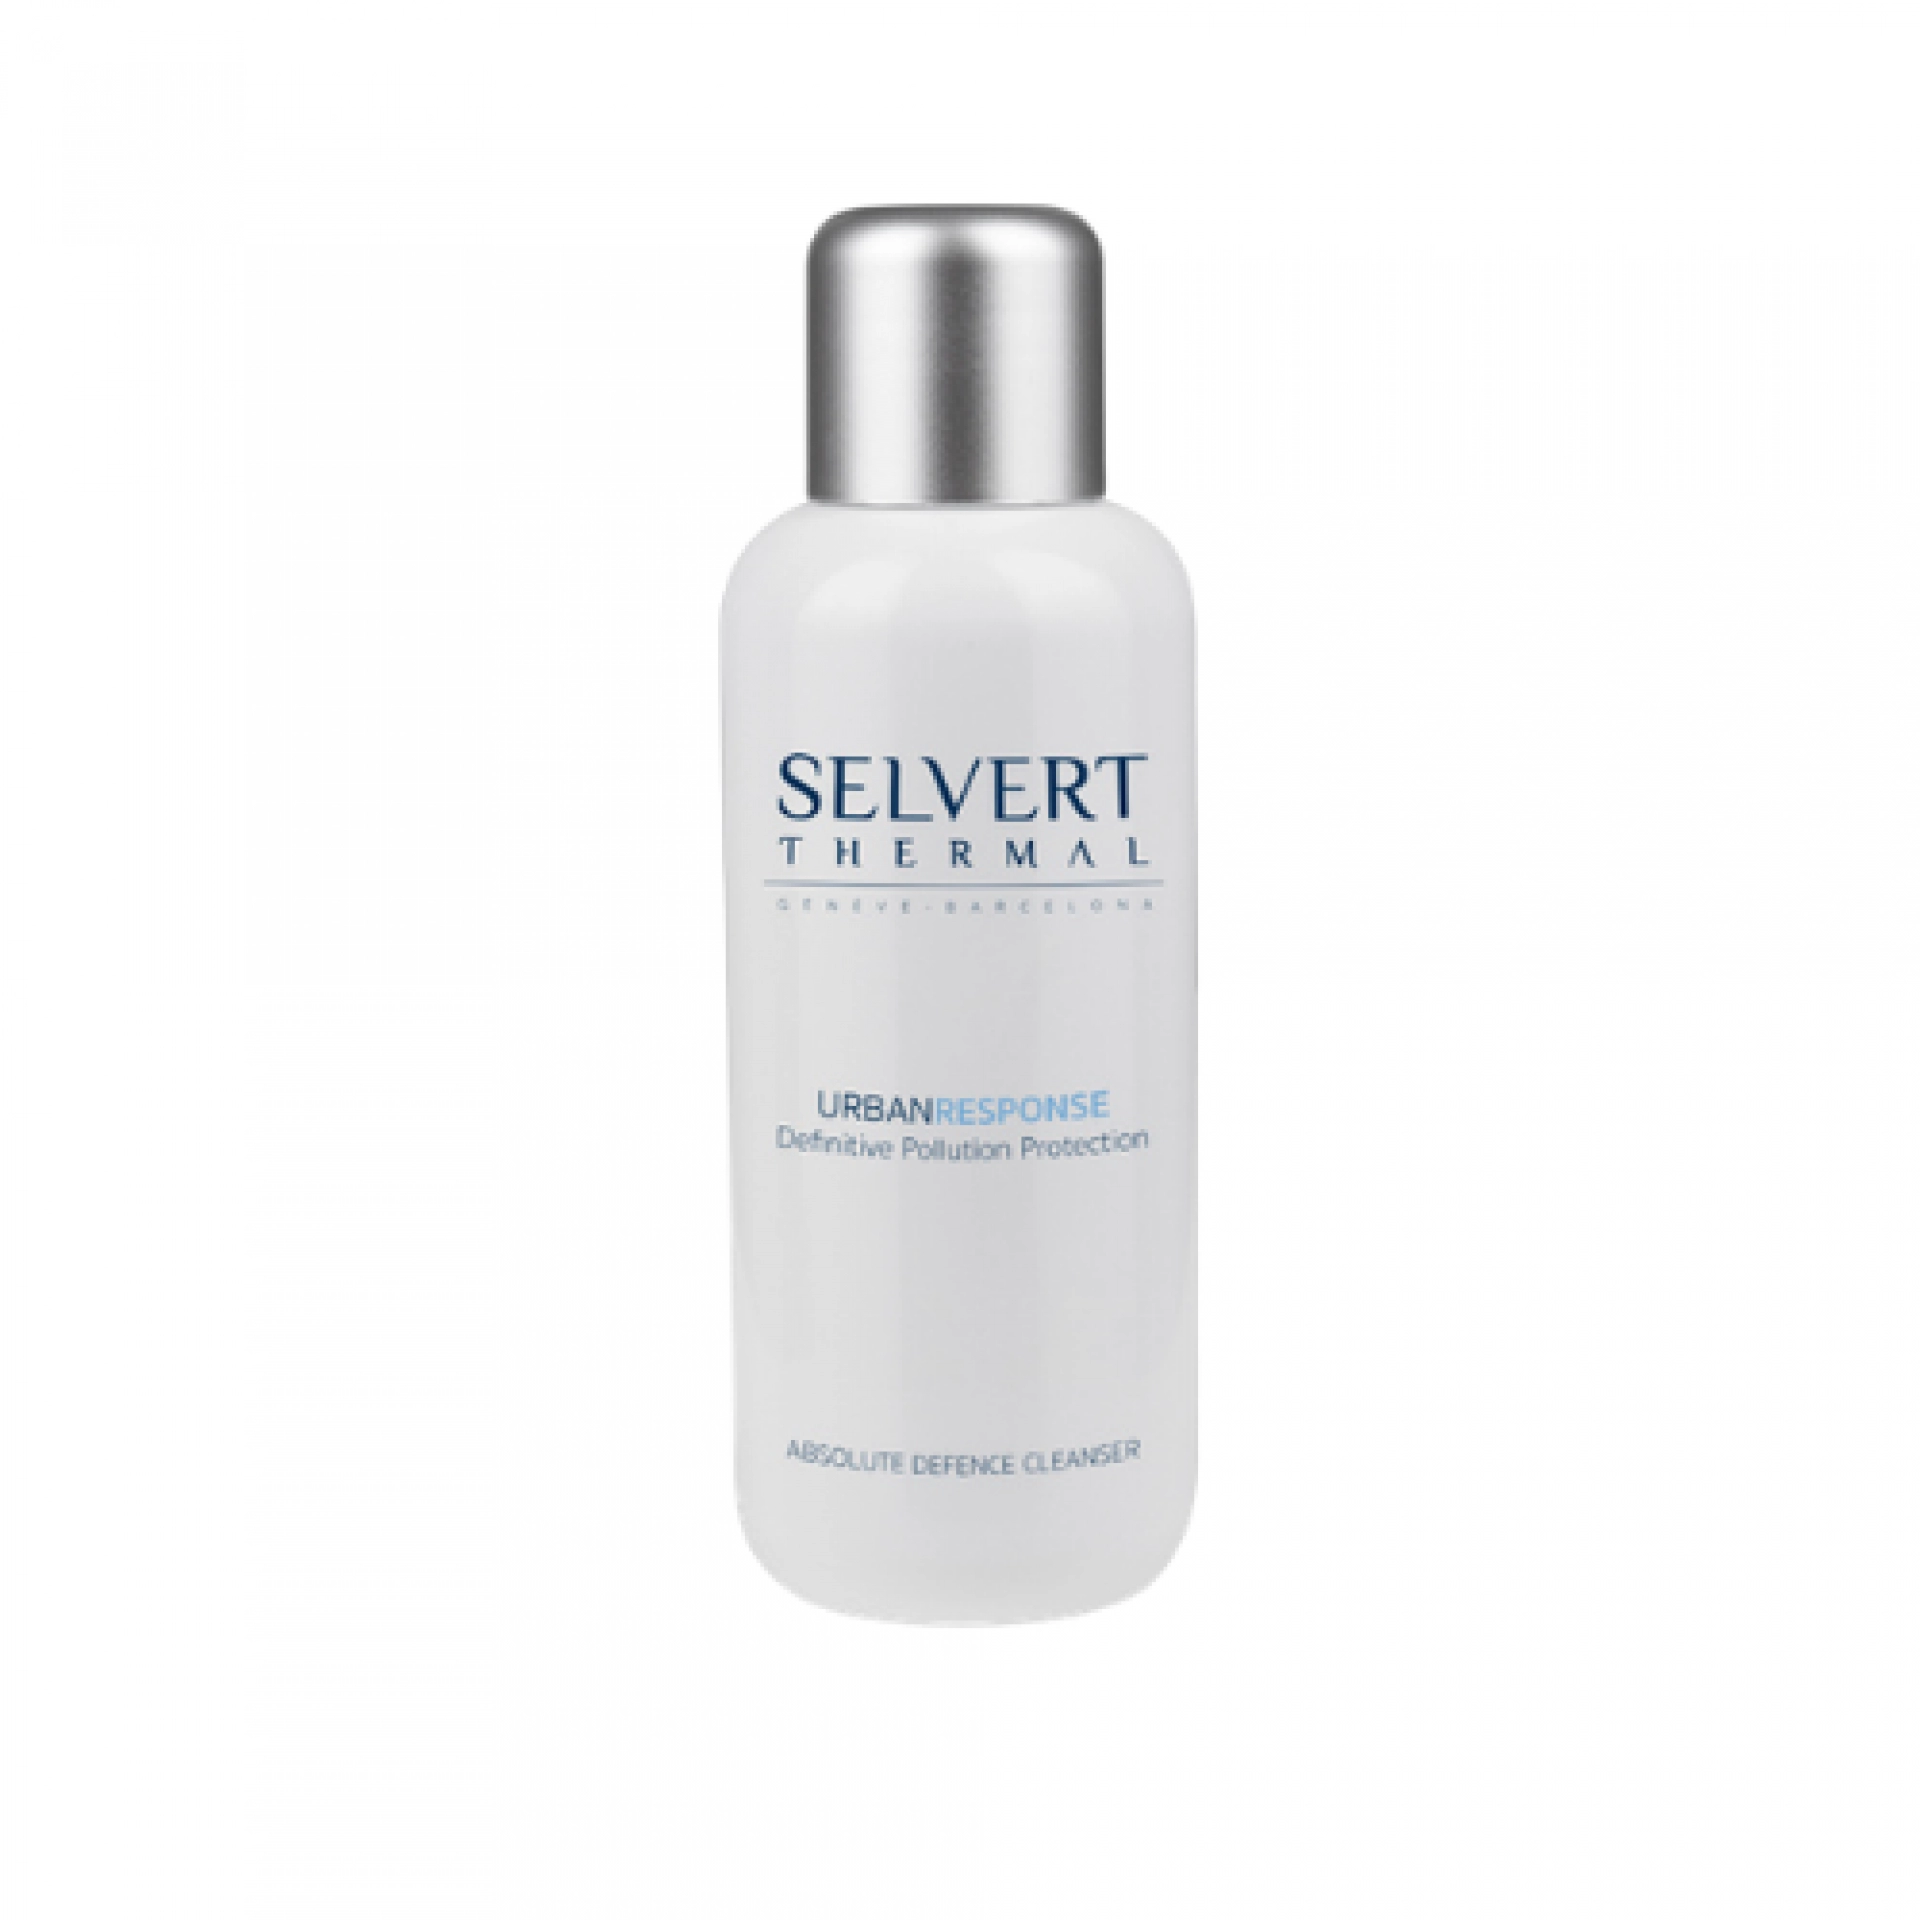 Absolute Defence Cleanser | Limpiador 200ml - Urban Response - Selvert Thermal ®